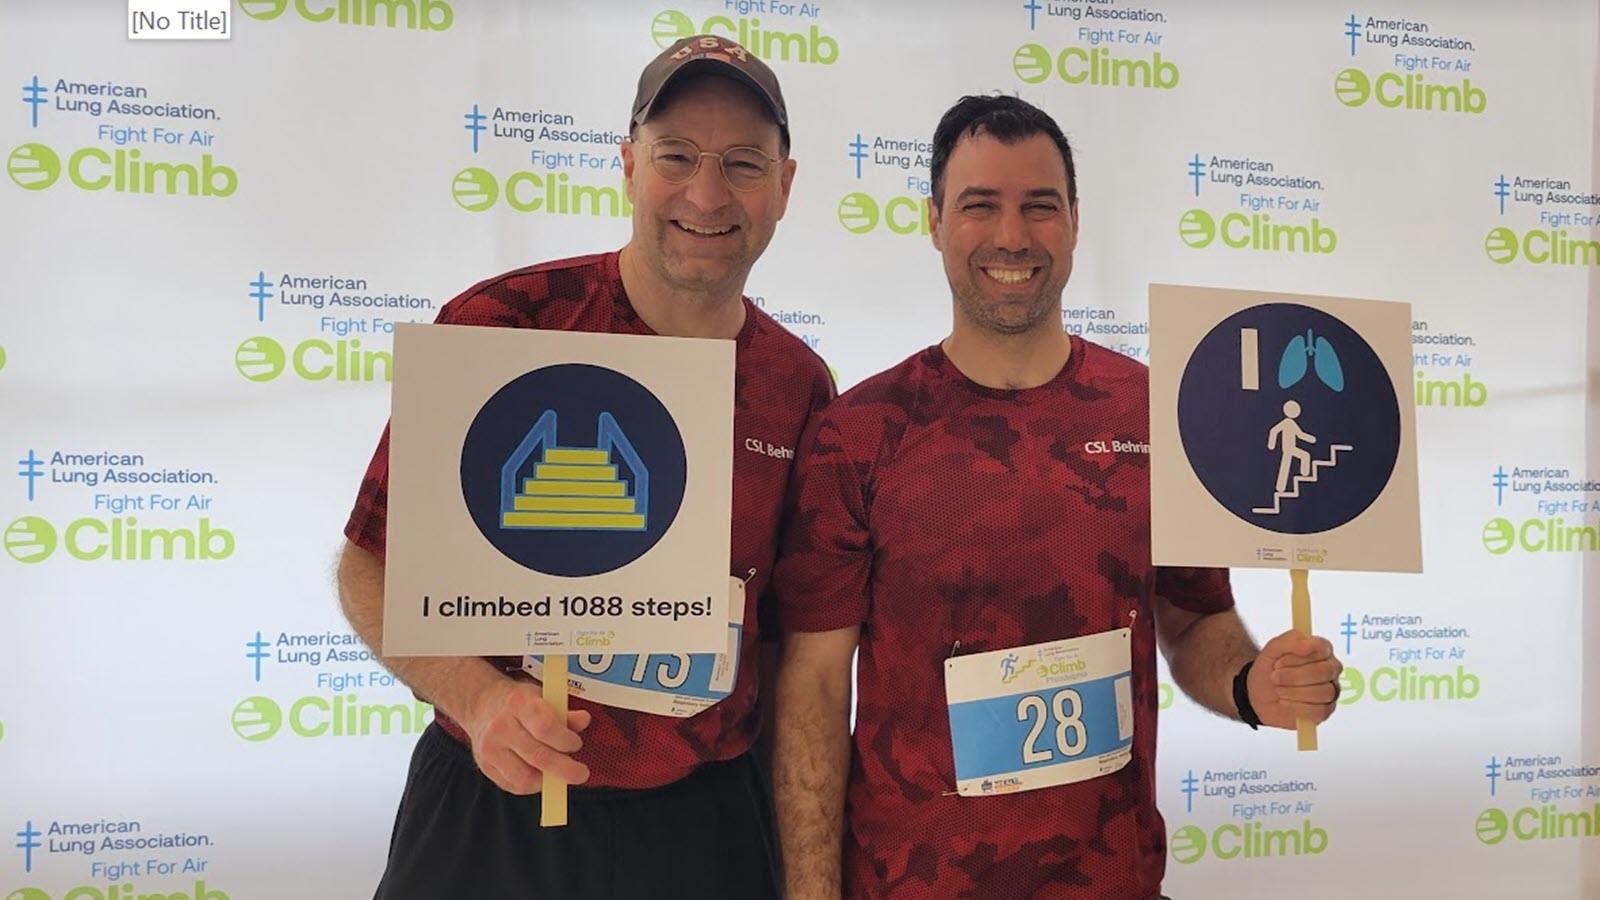 Patrick Swann and Ron Chamrin following the Fight for Air Climb in Philadelphia